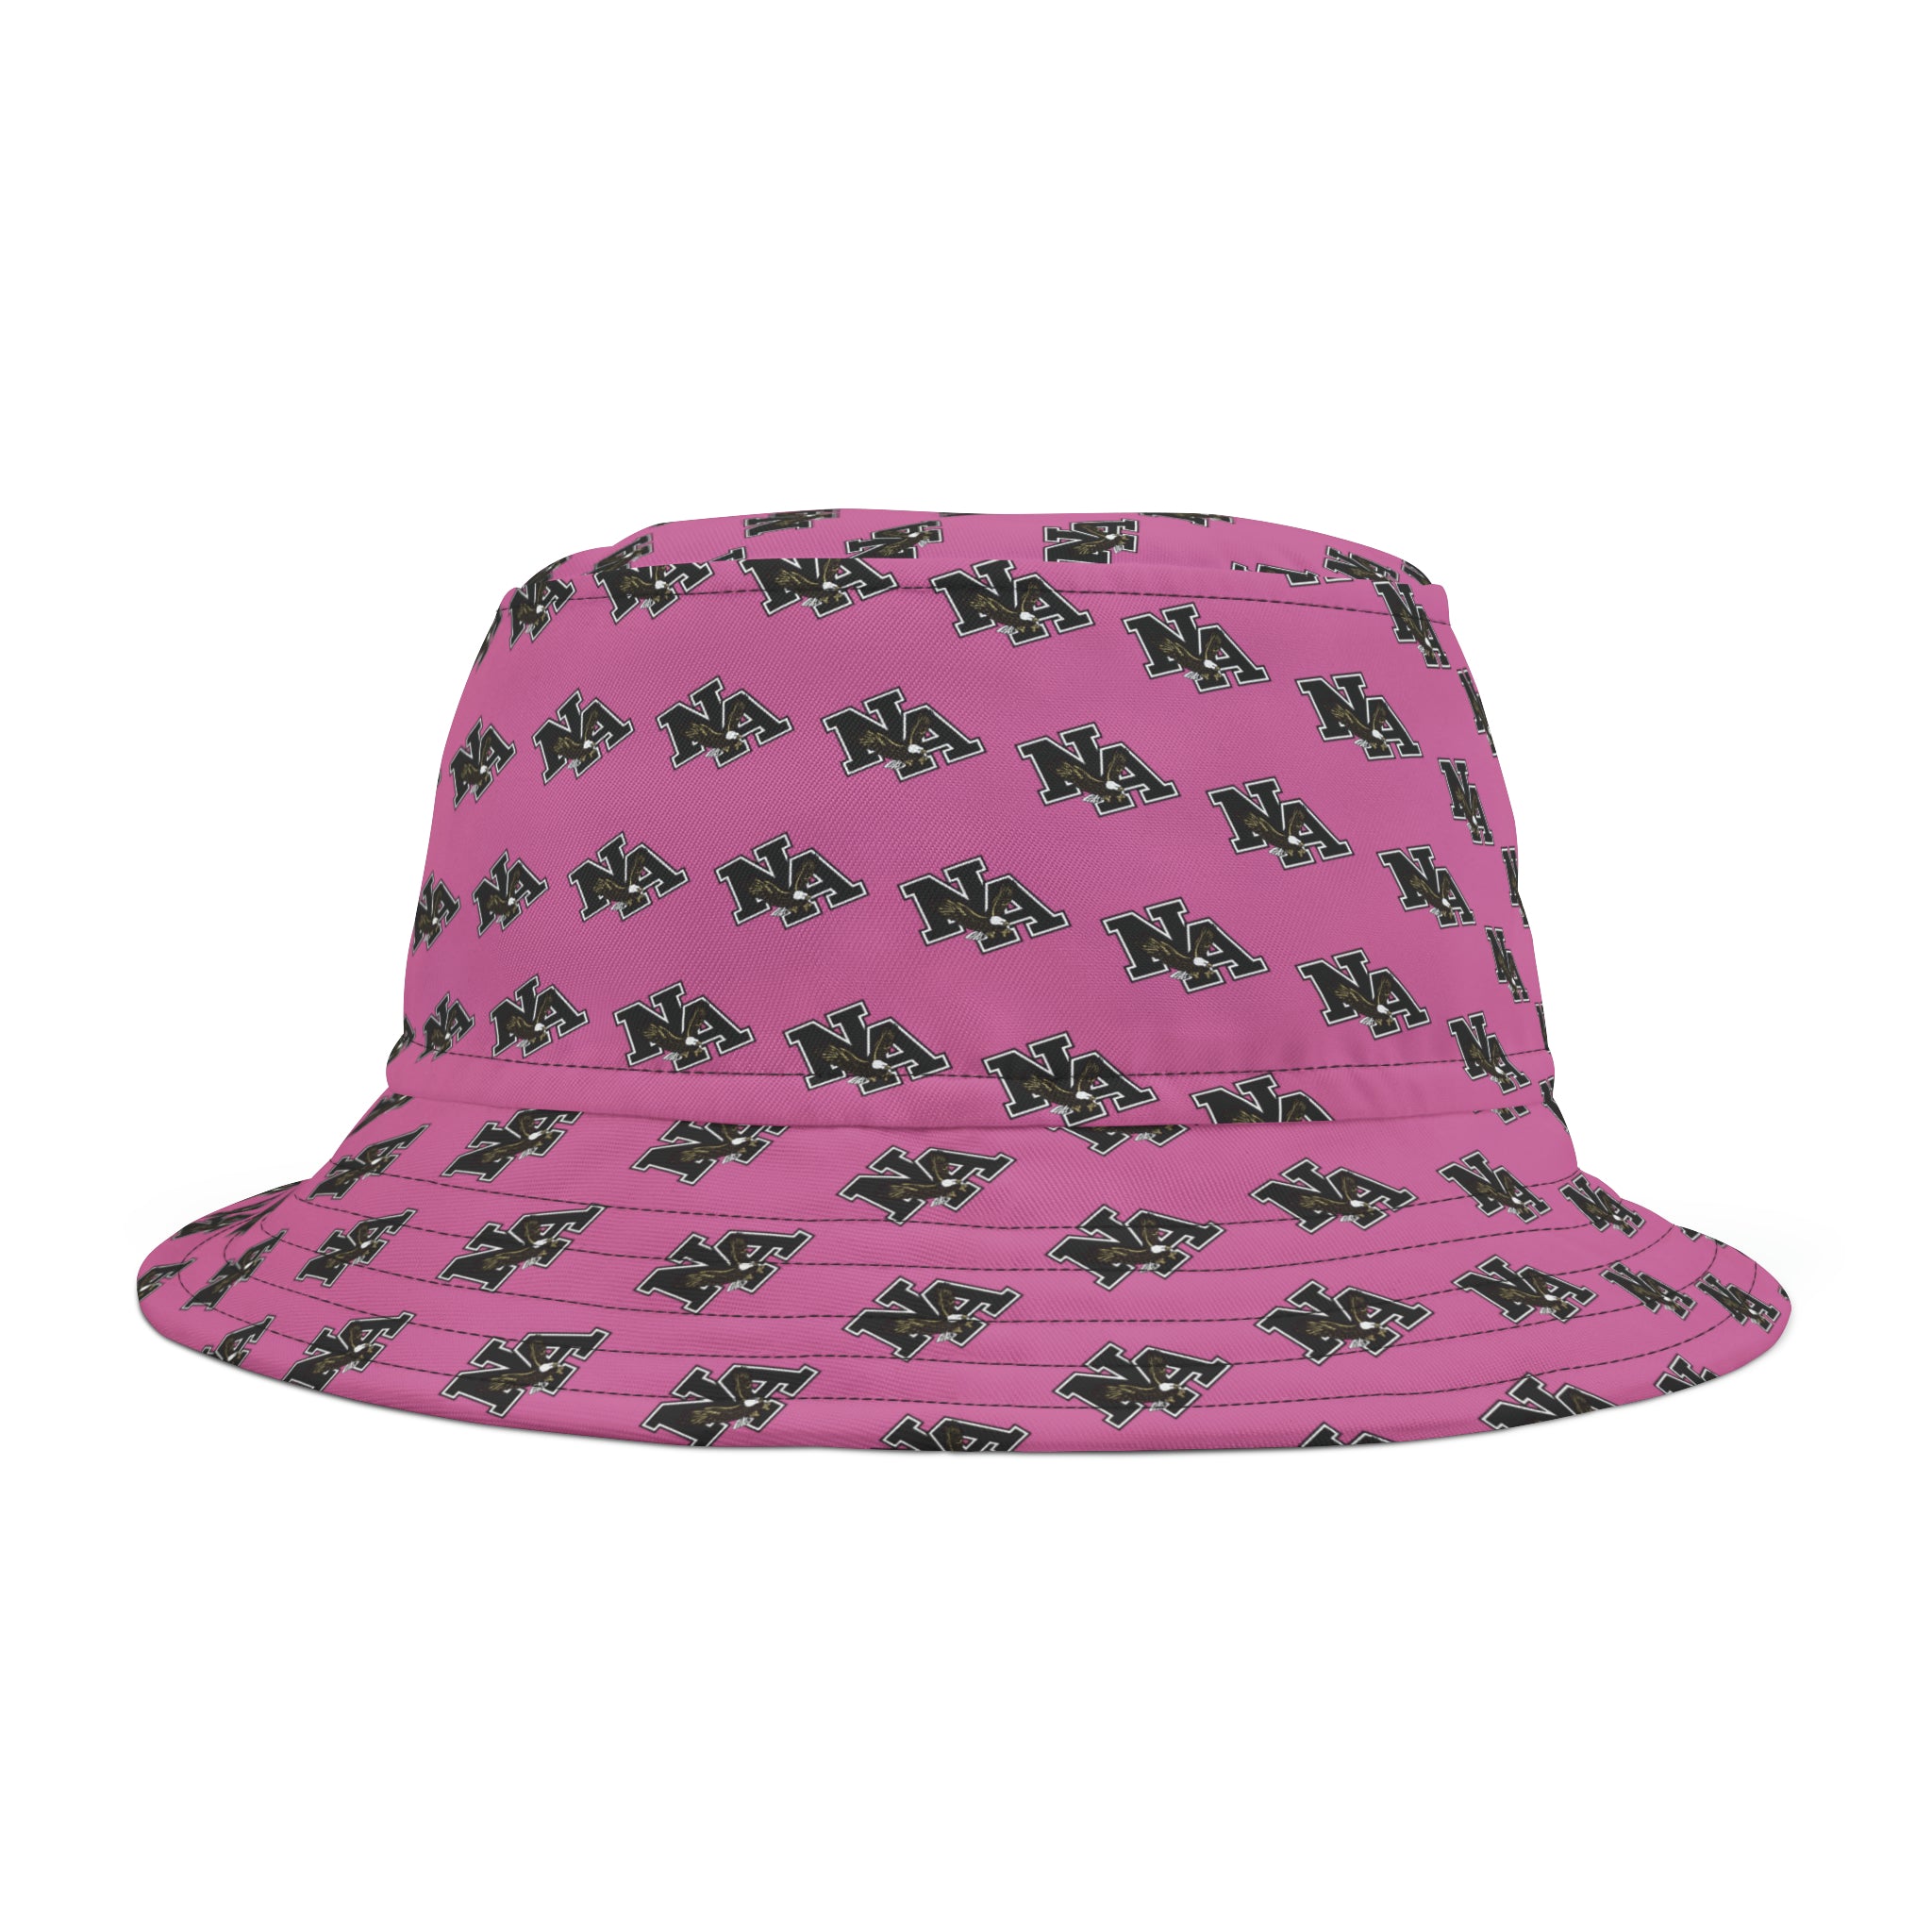 Adult Unisex Classic Logo Allover Print Pink Bucket Hat - New Albany Eagles